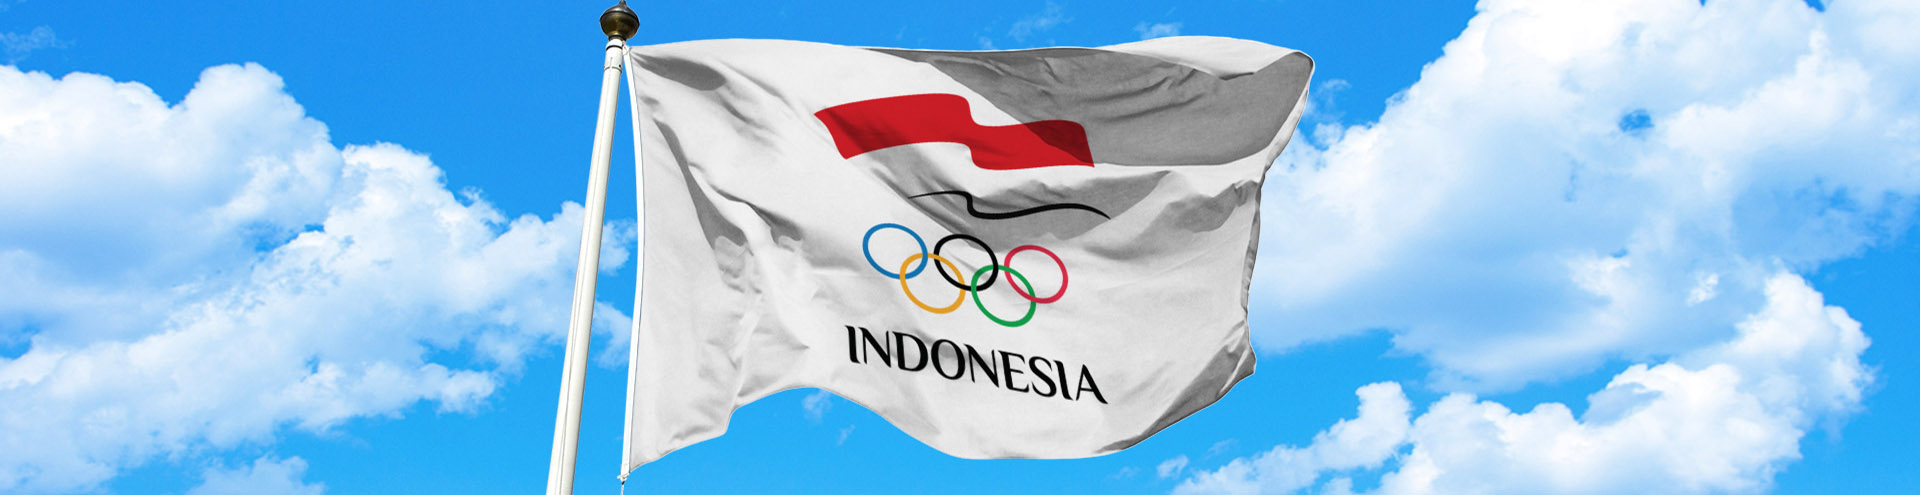 KOI, Covid-19 Task Force to collaborate in mask campaign - Indonesia Olympic Commitee